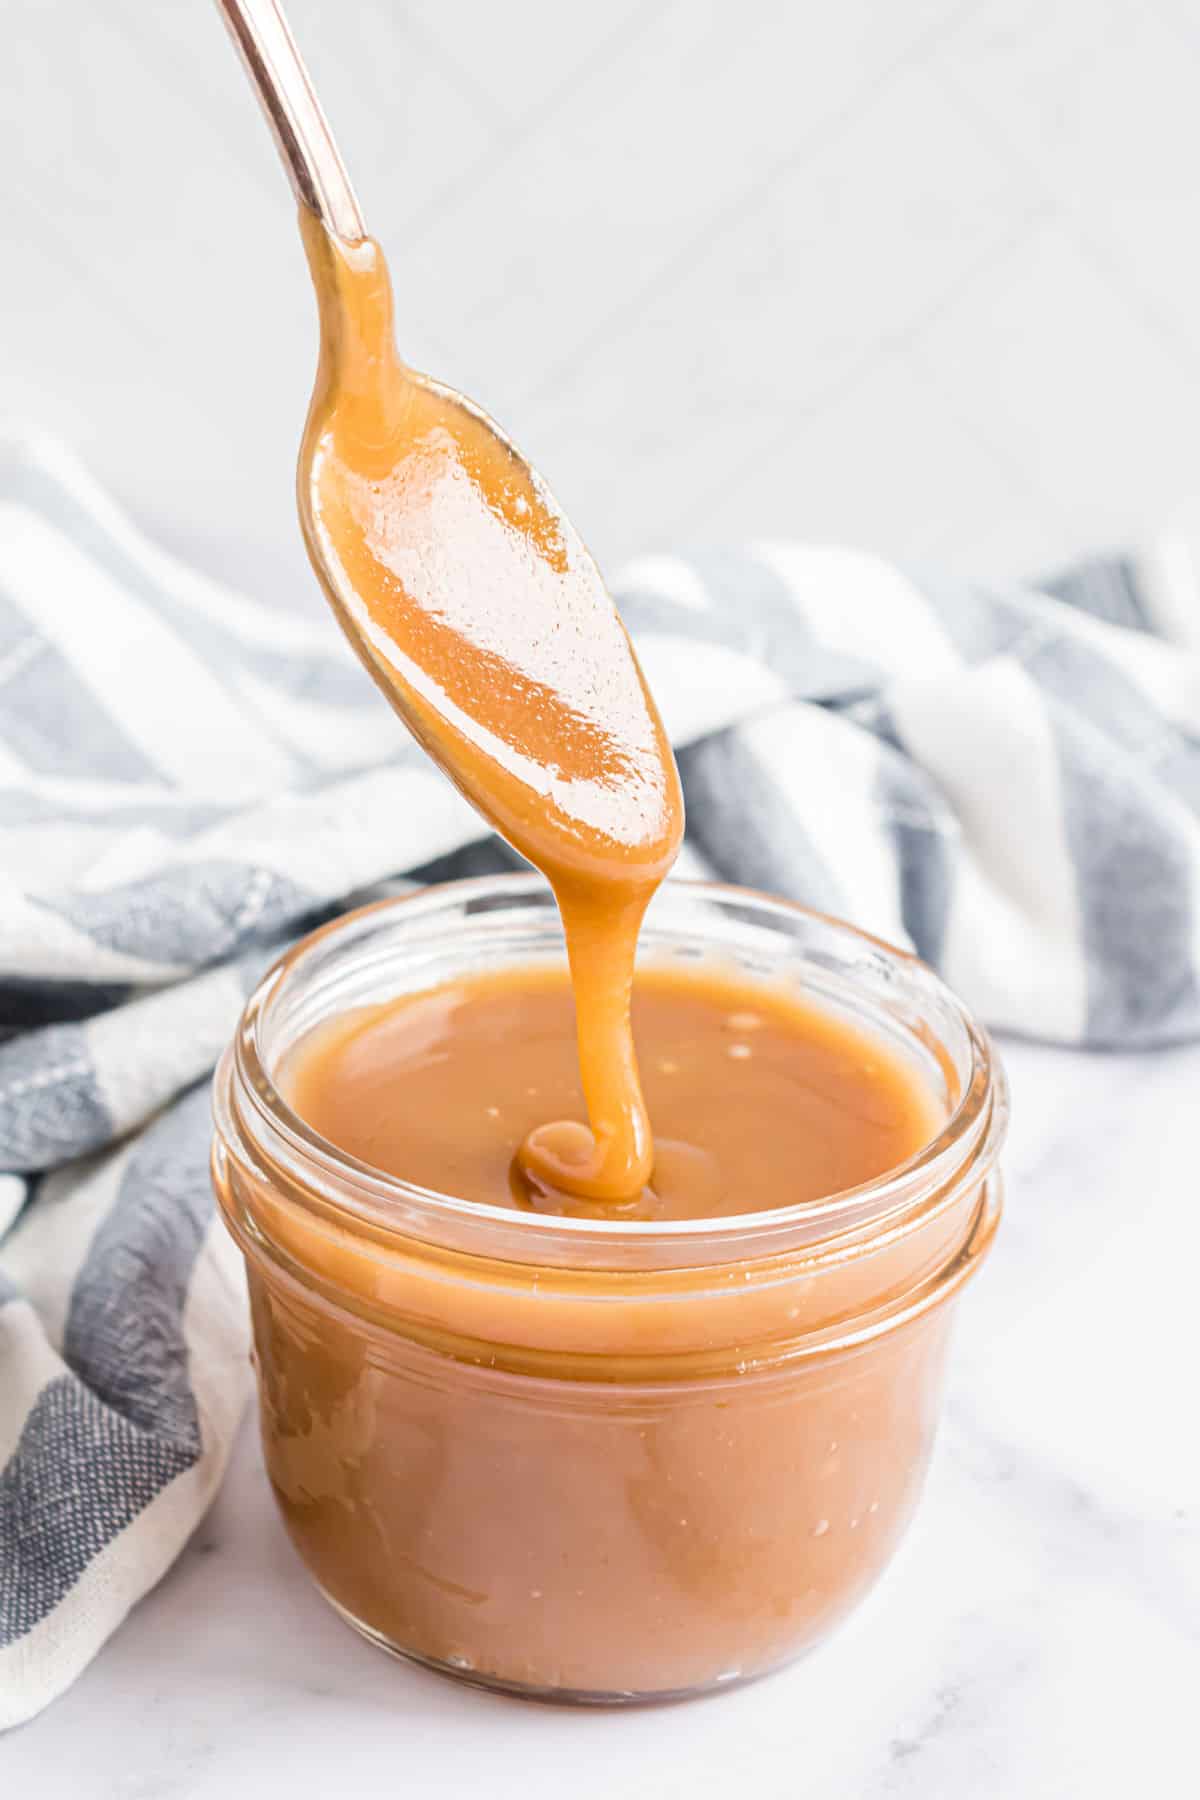 Butterscotch sauce in a small jar and a spoon.